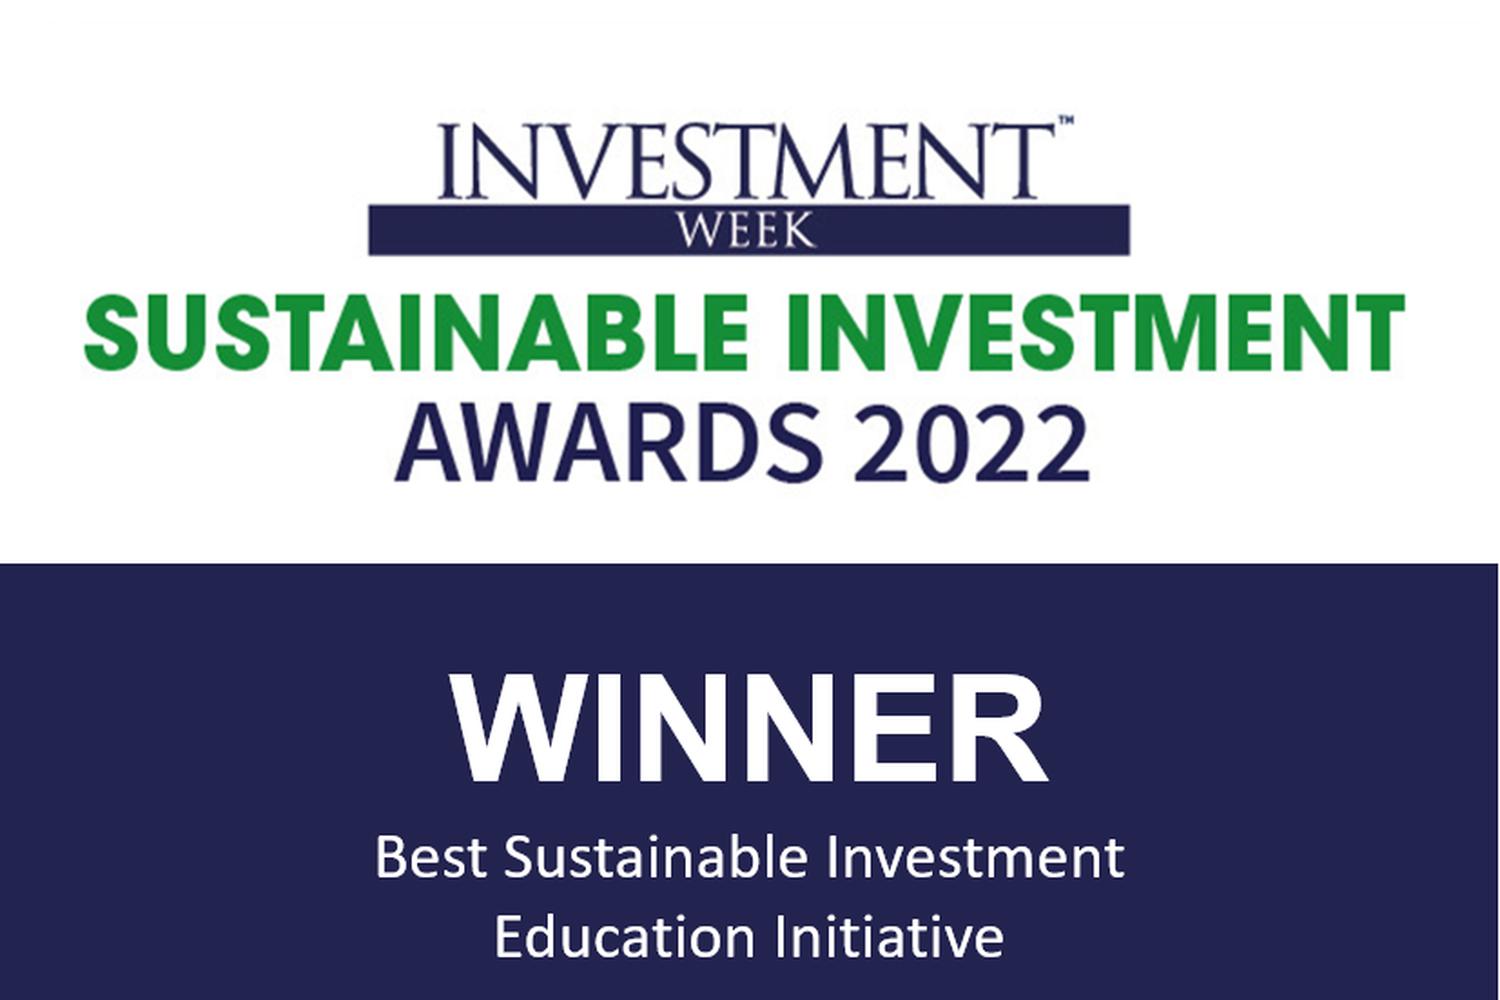 Arvella Investments has won Investment Week’s Sustainable Investment Award 2022 for Best Sustainable Investment Education Initiative.